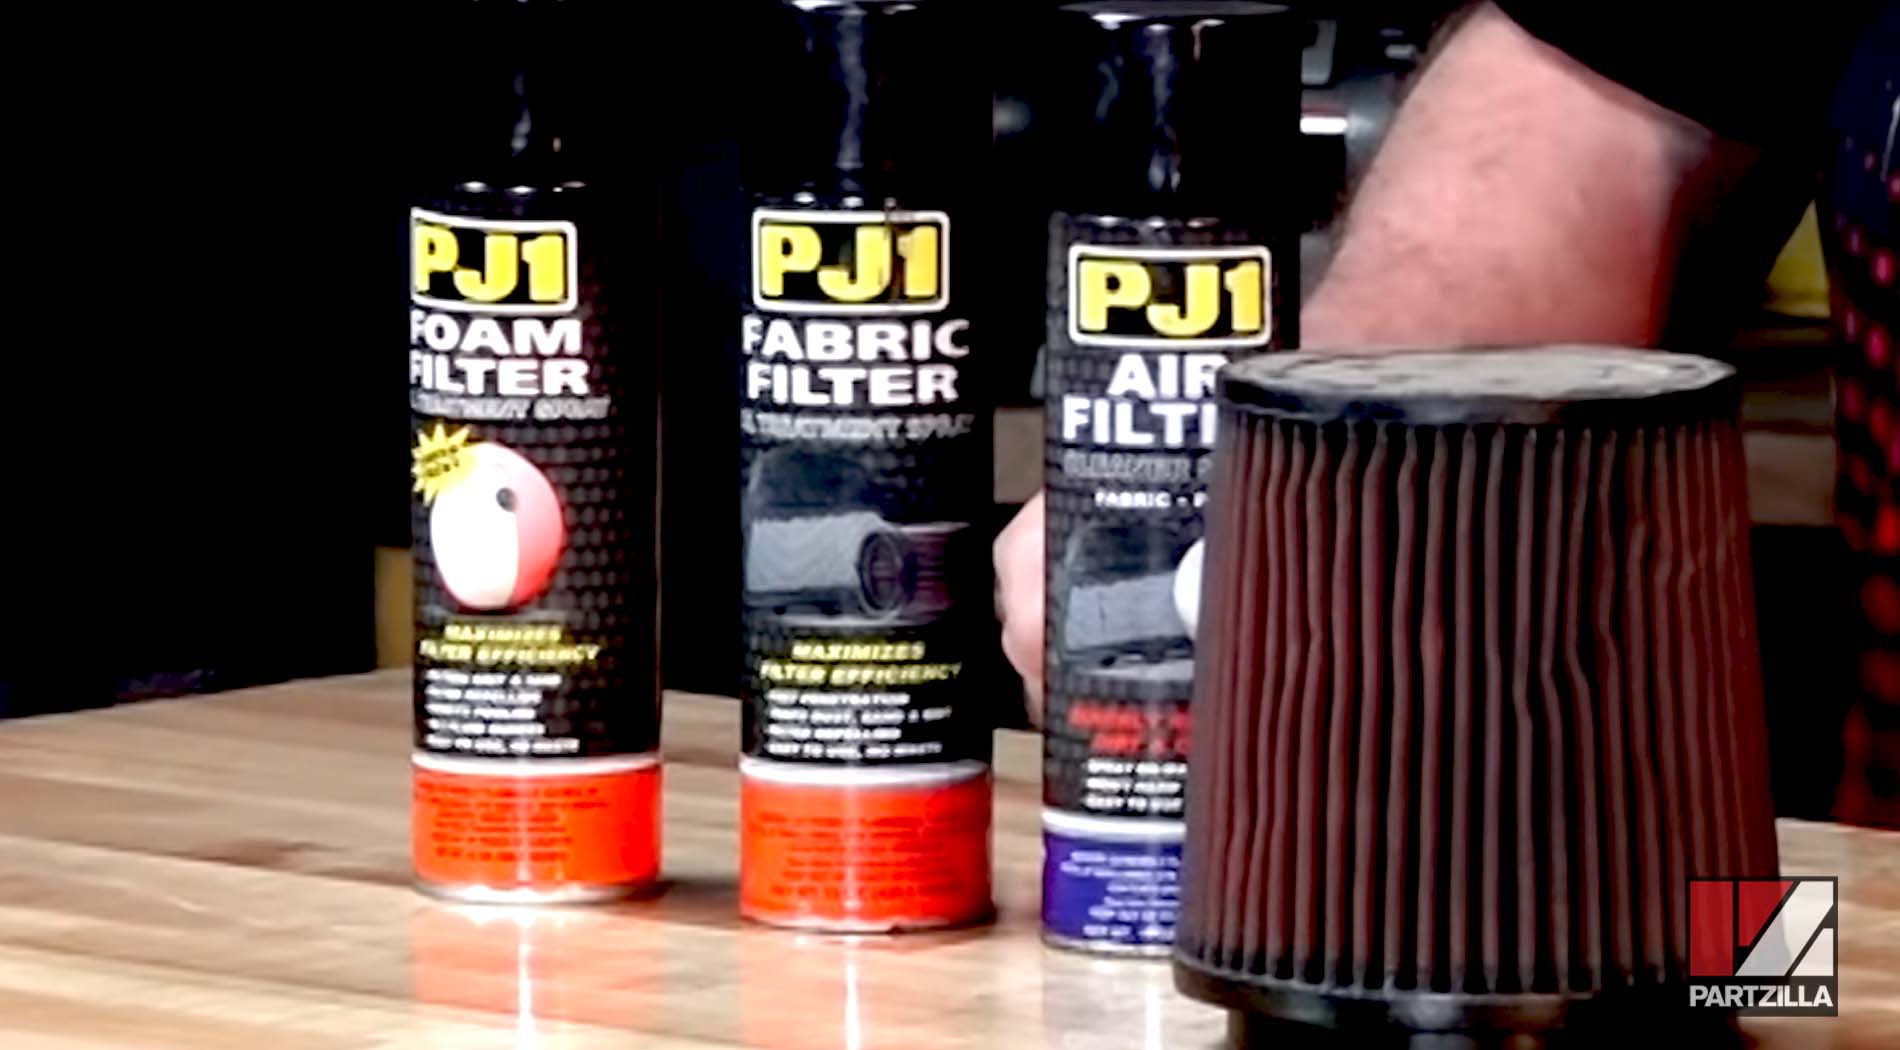 PJ1 air filter cleaning products